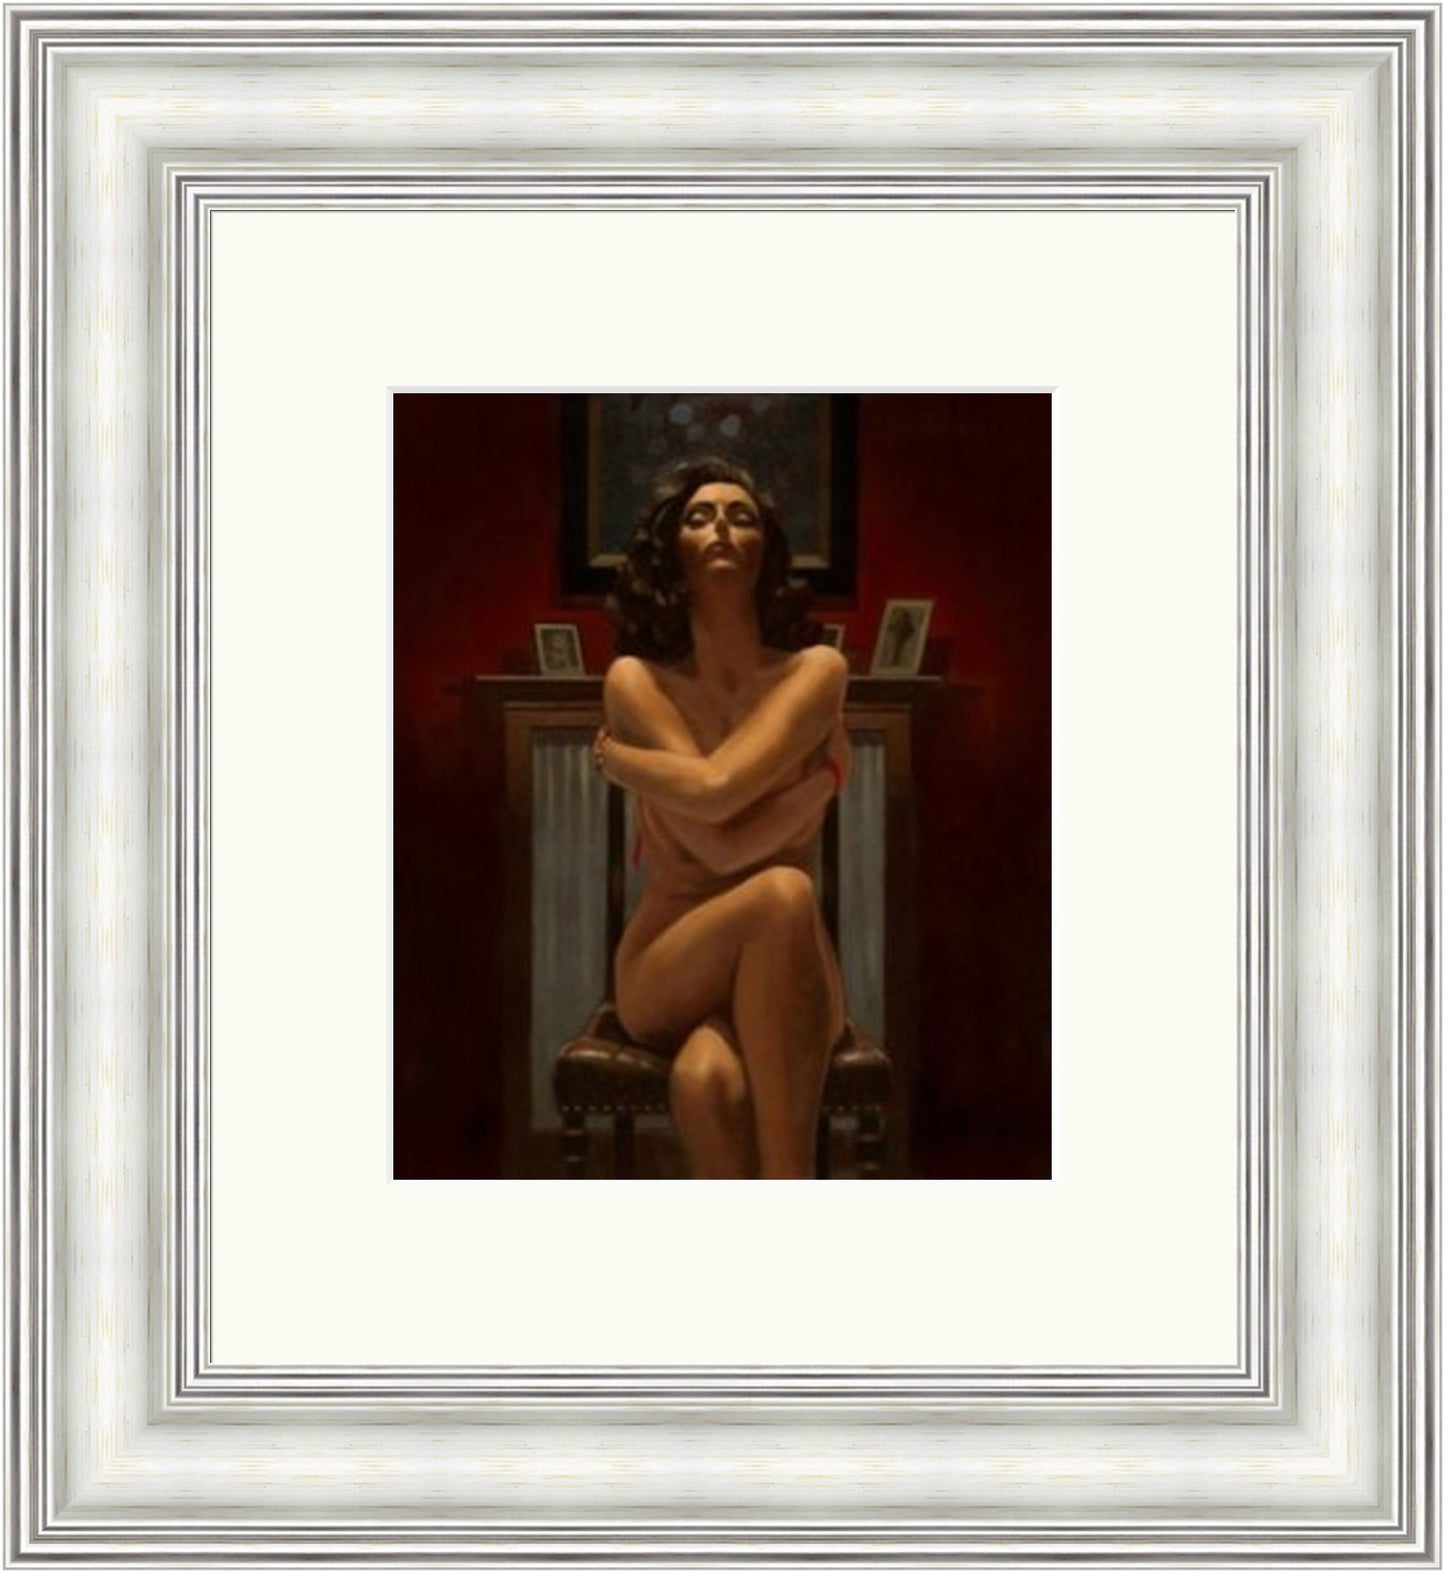 Just the Way It Is by Jack Vettriano